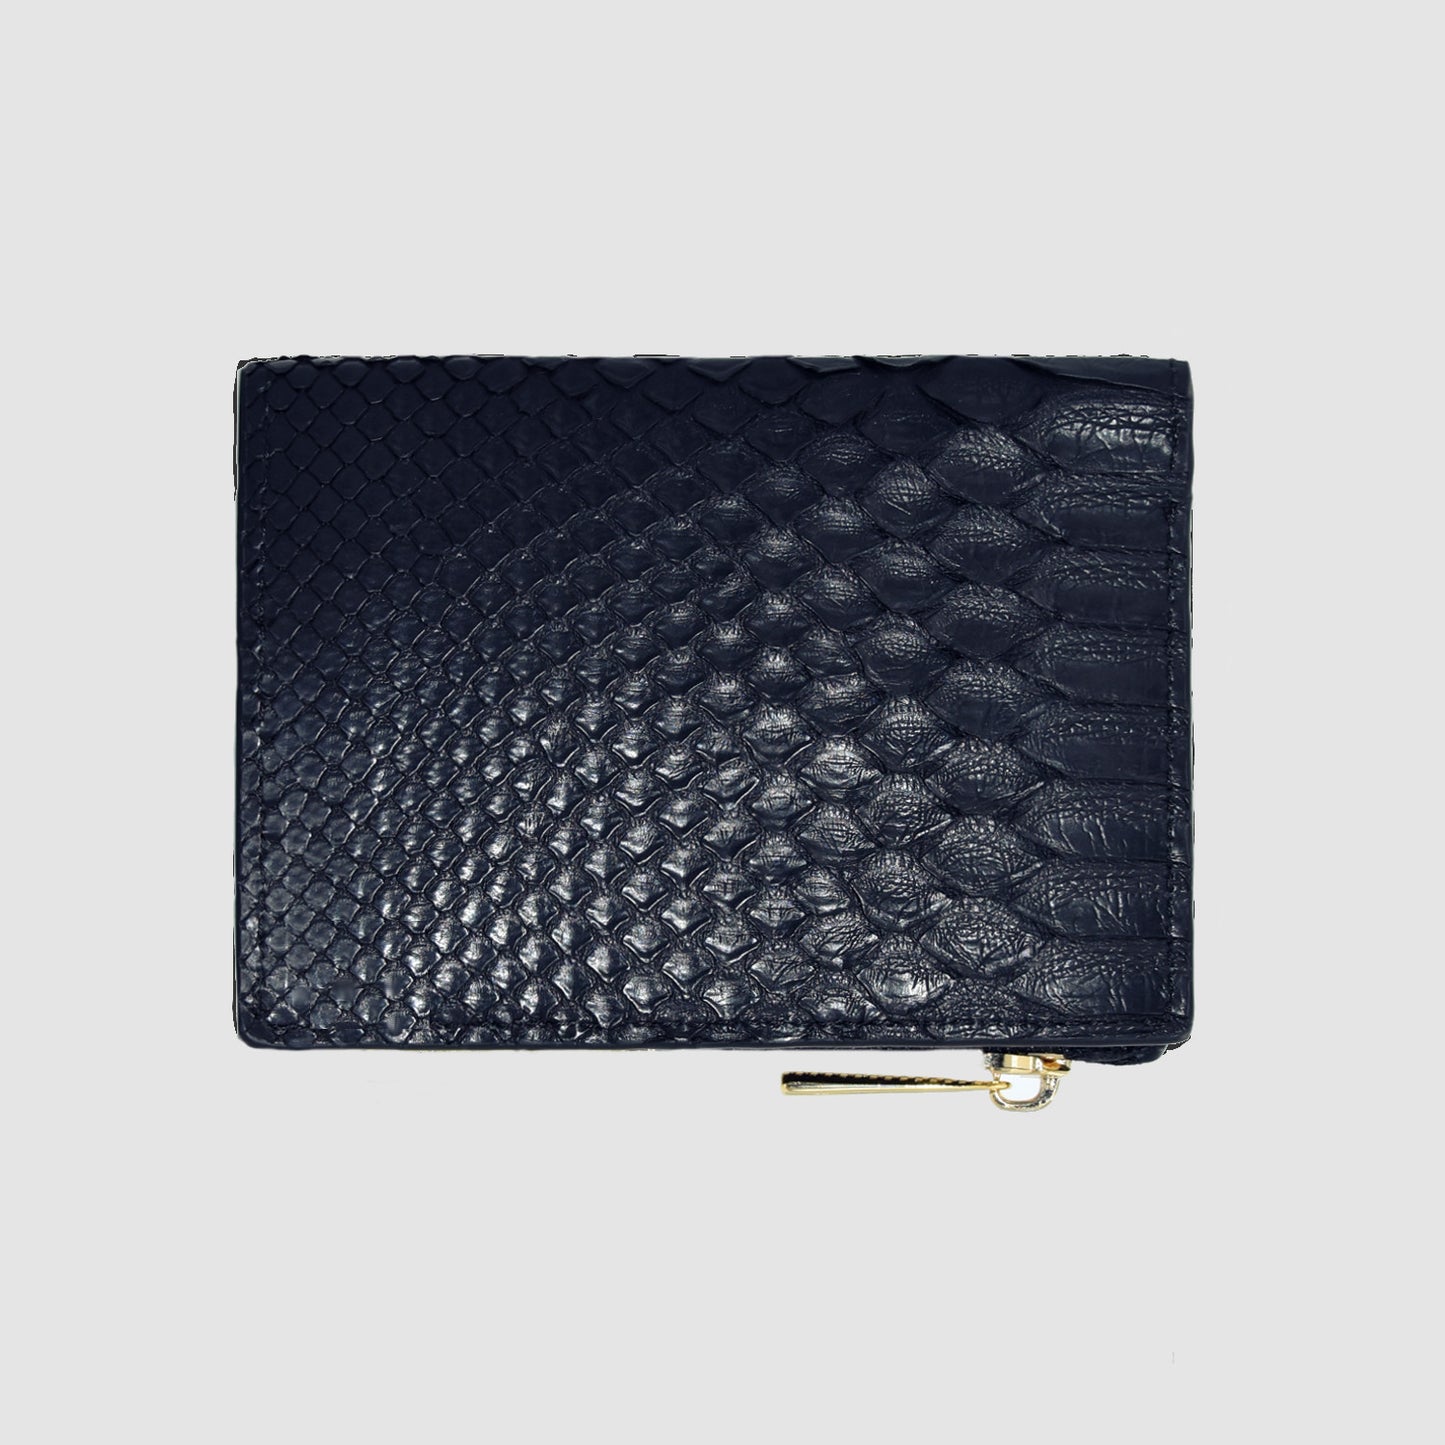  Wallet with Red Python Heart in Black Python skin